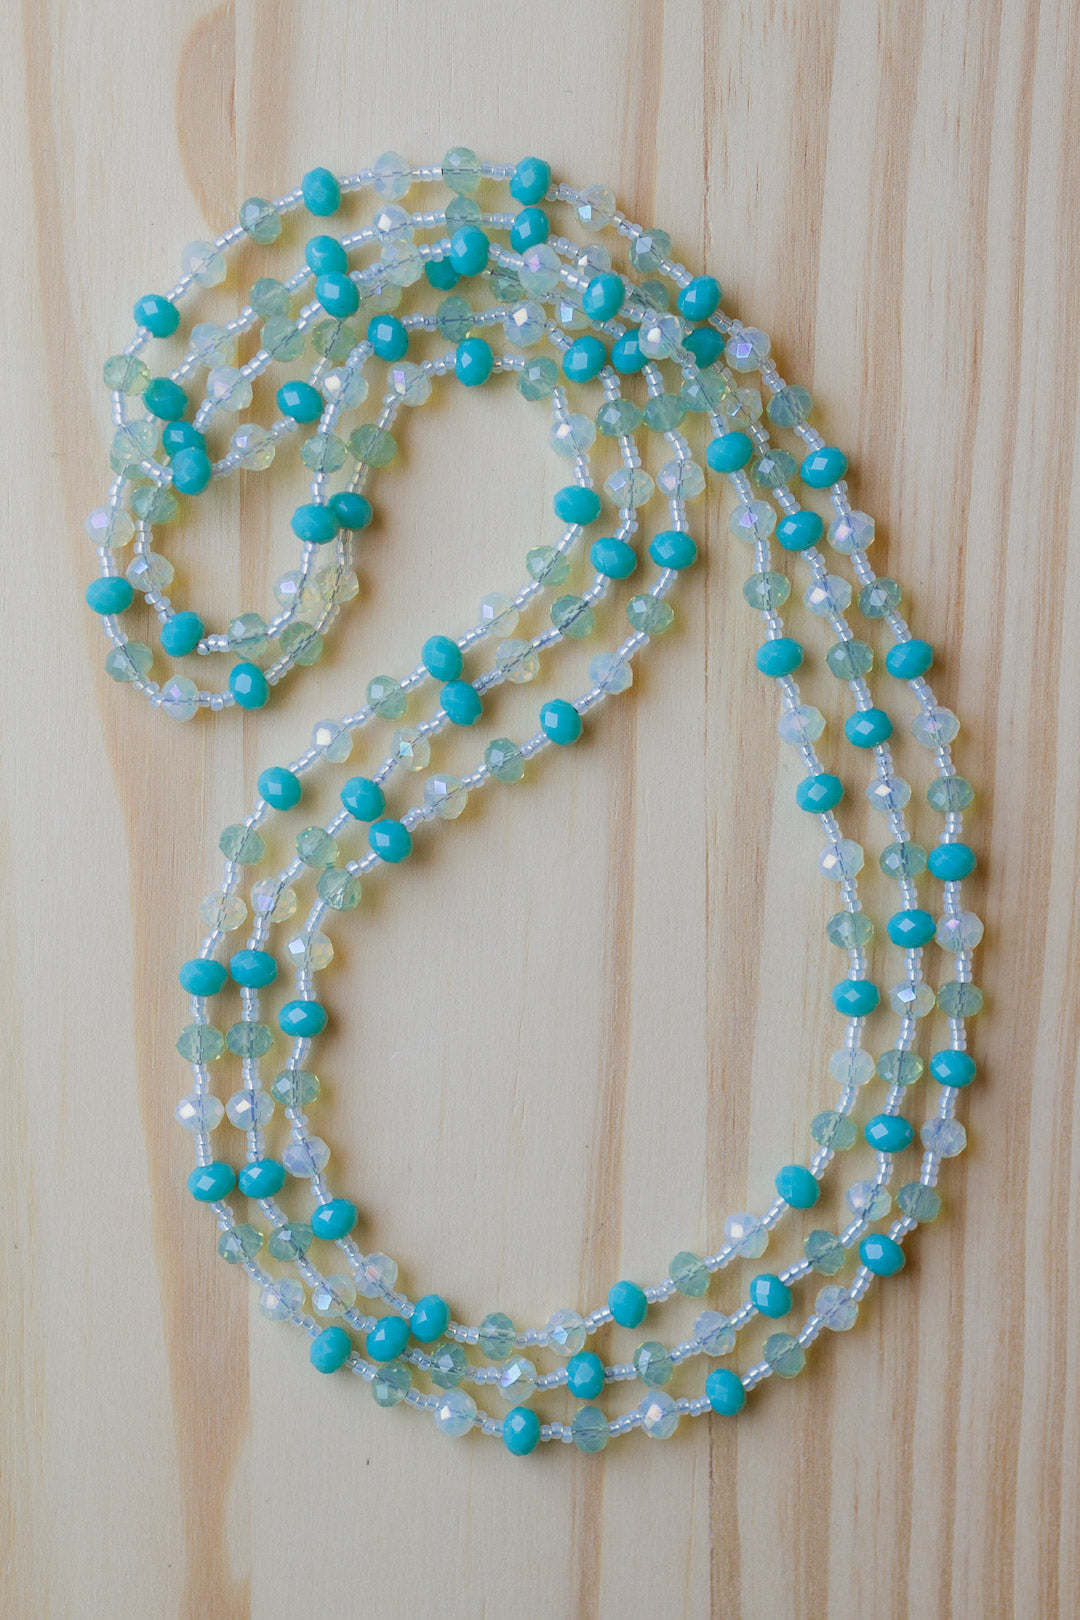 60" Extra Long Beaded Wraparound Necklace with Turquoise Peridot Green & Pale Lemon Crystal Beads - My Urban Gems